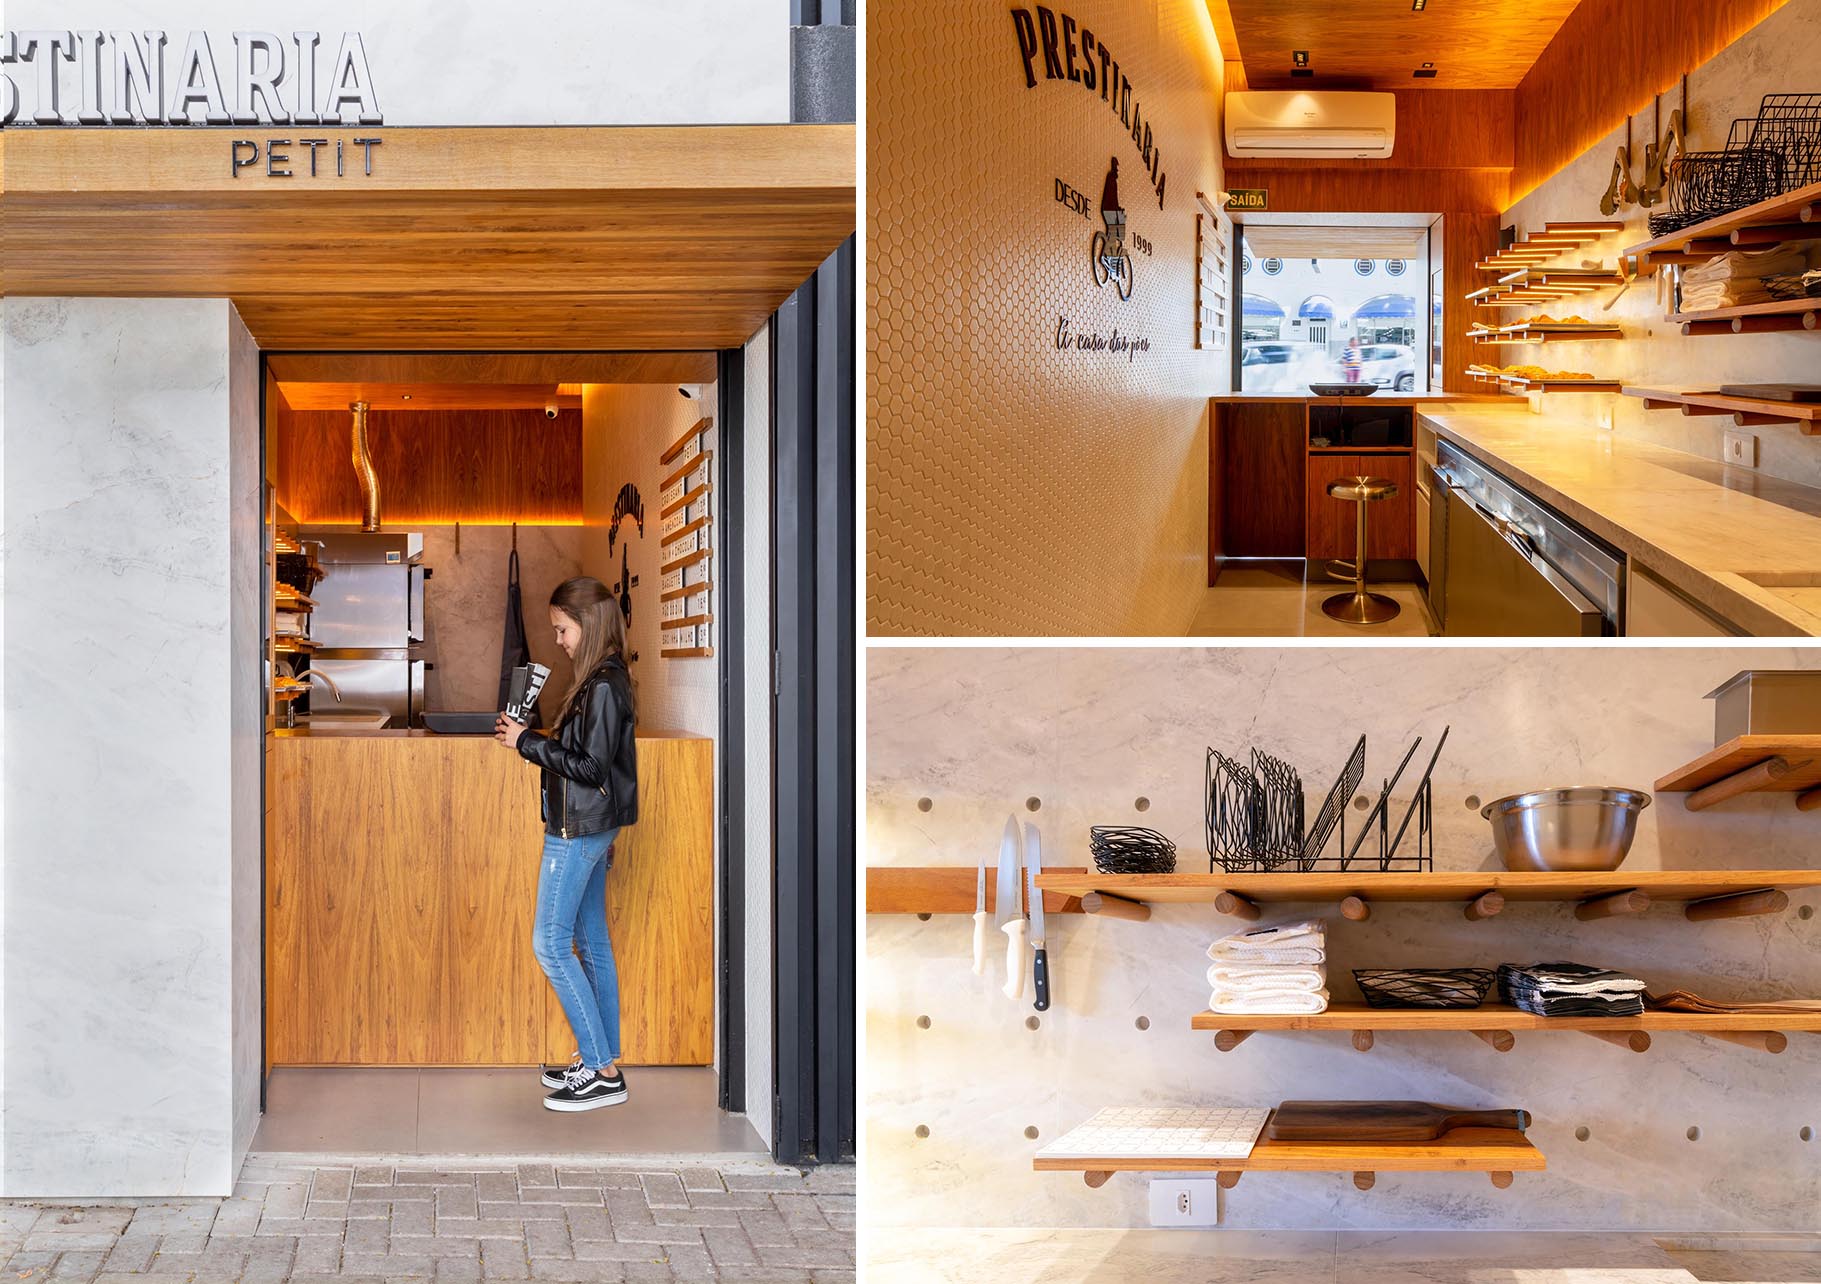 A small bakery makes use of wood dowels with hidden LED lighting to hold up shelving.